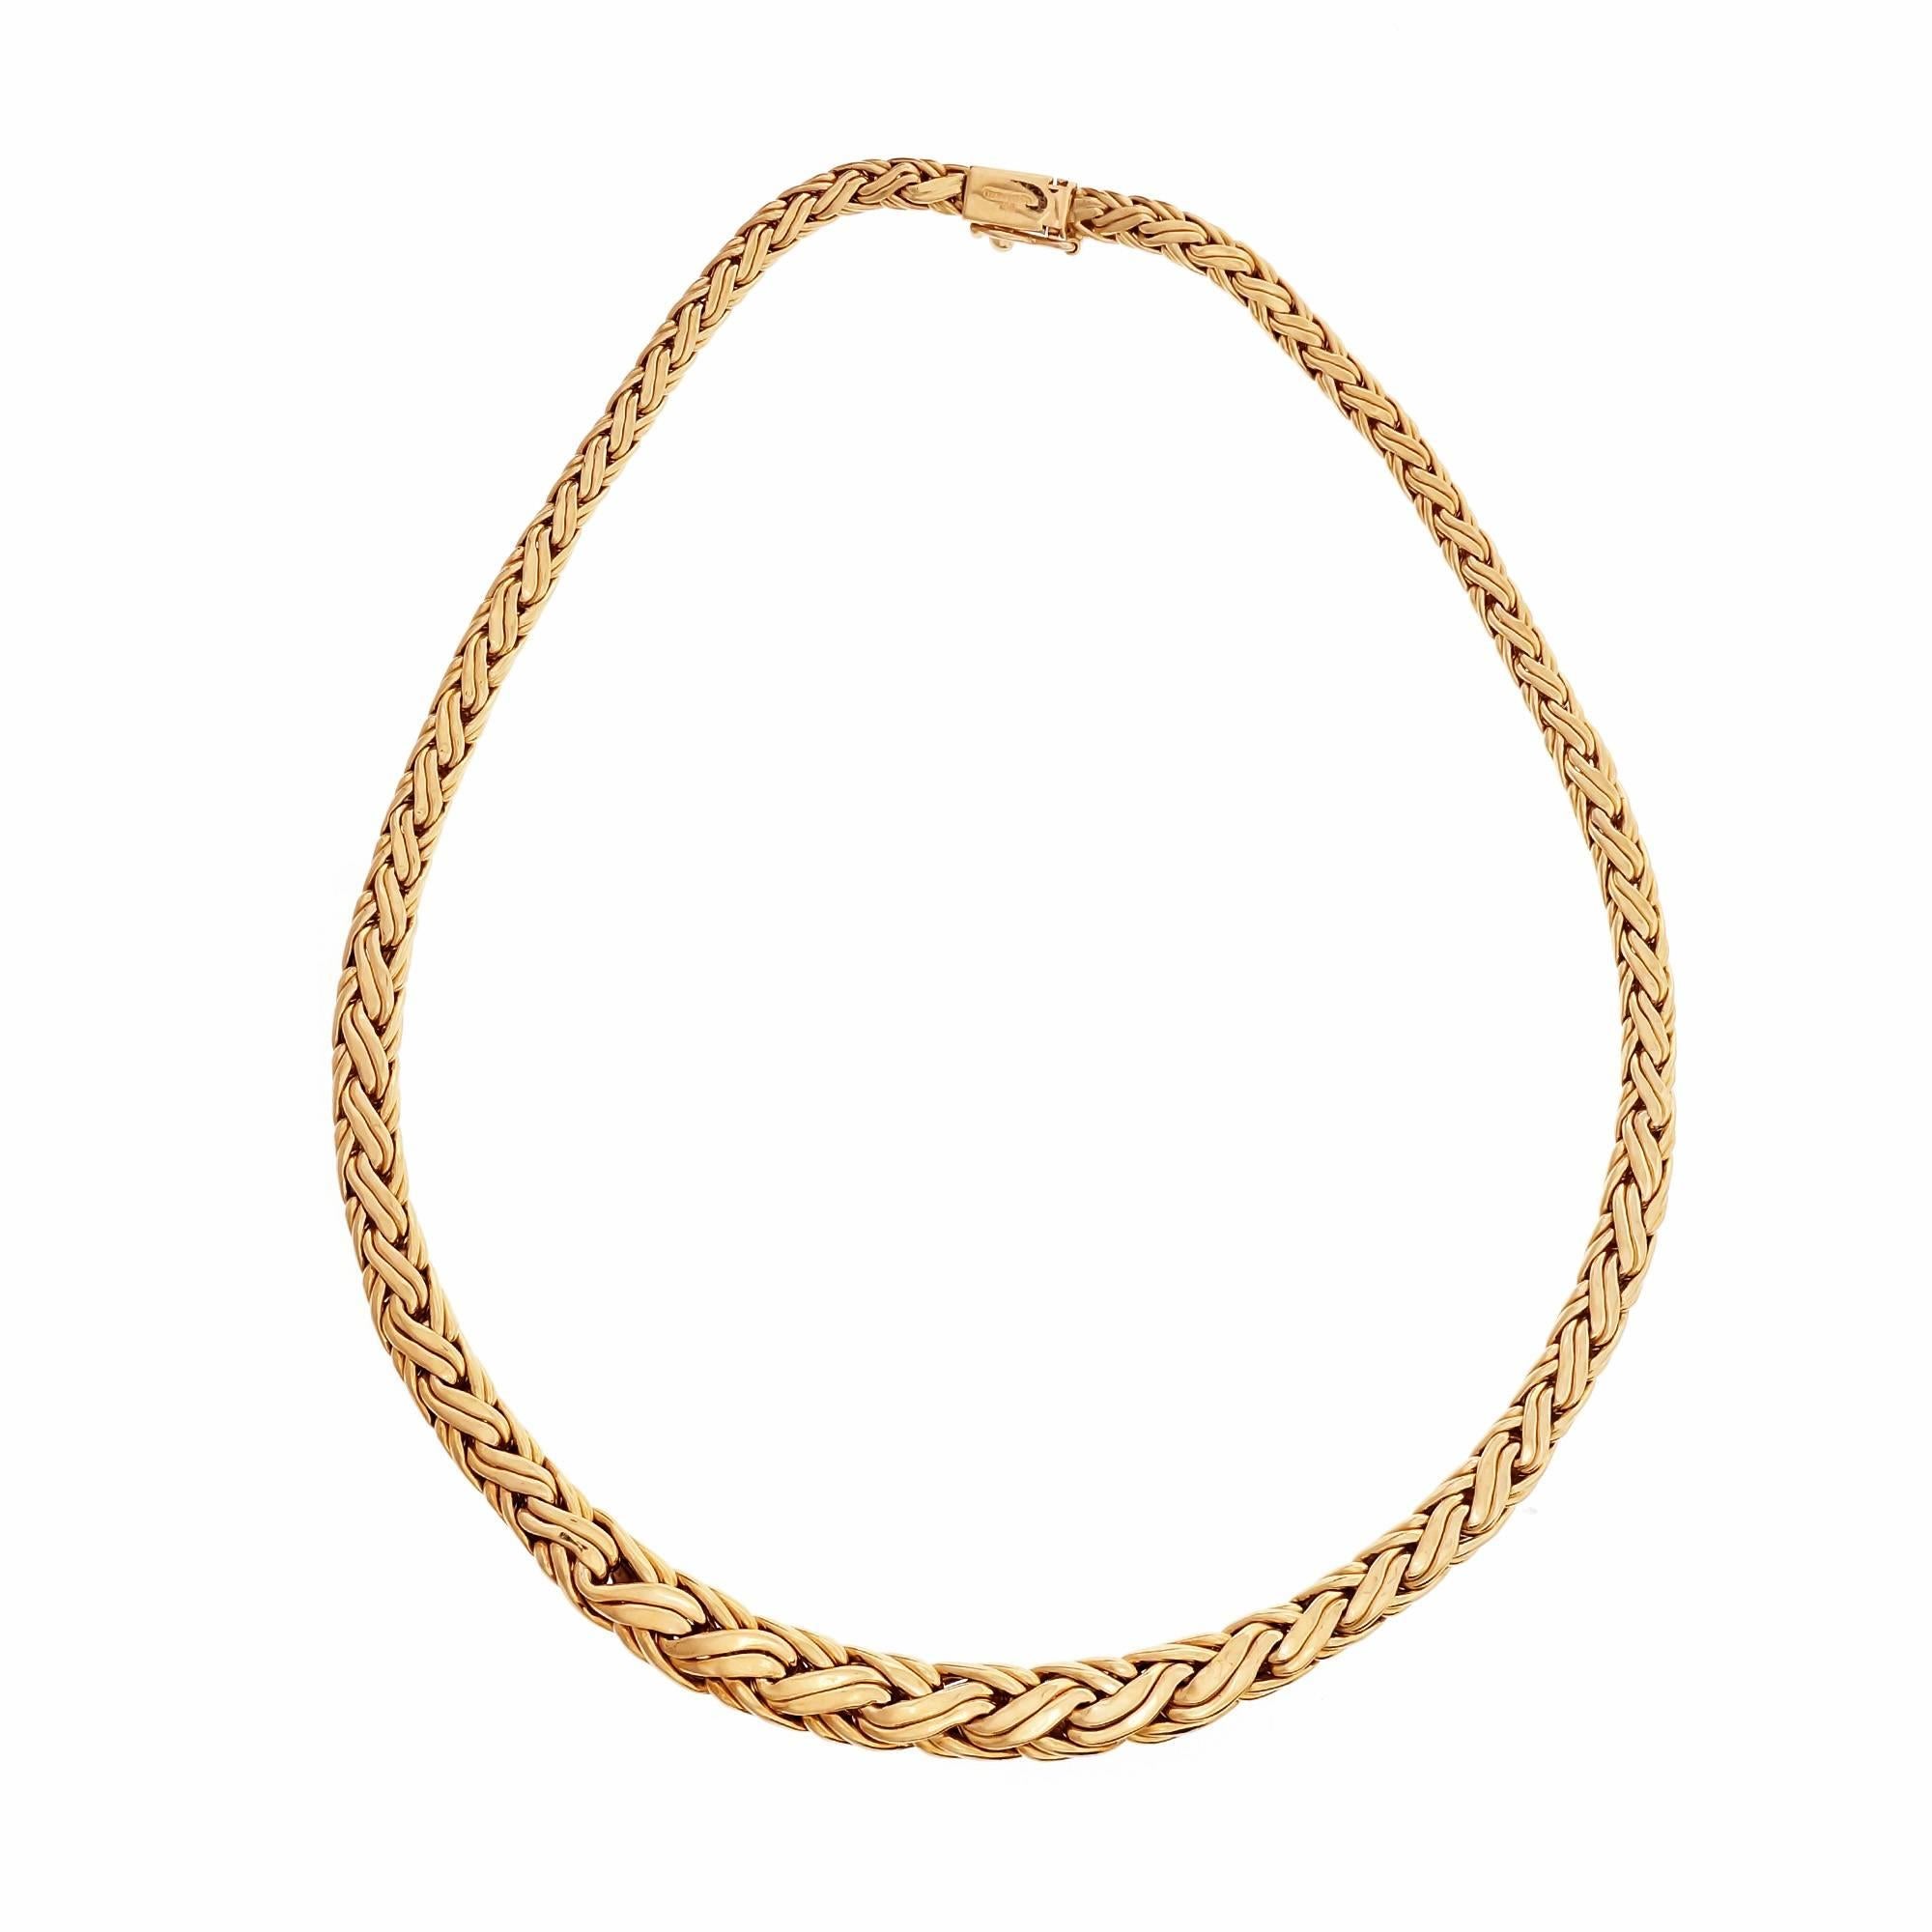 Tiffany & Co. Woven Graduated Link Gold Necklace